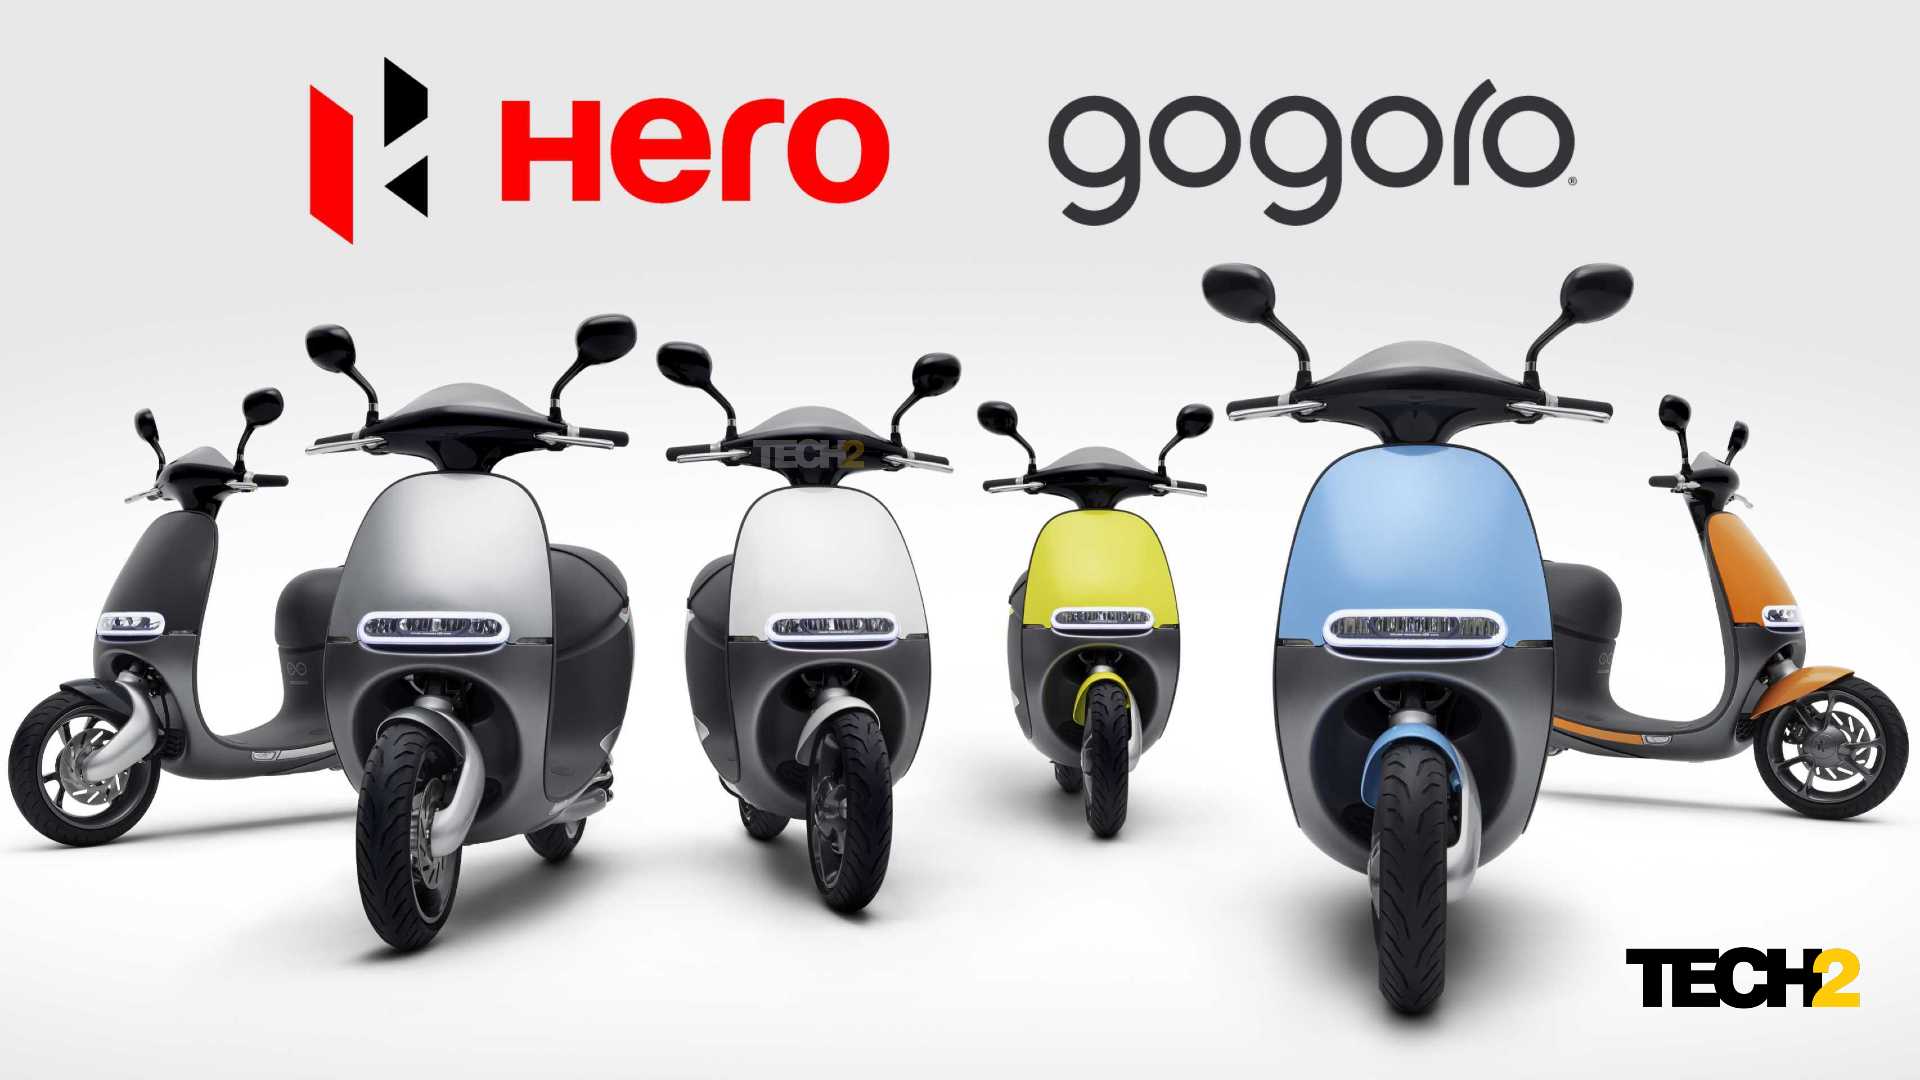 The first model to emerge from Hero's partnership with Gogoro is likely to debut in 2022. Image: Gogoro/Tech2